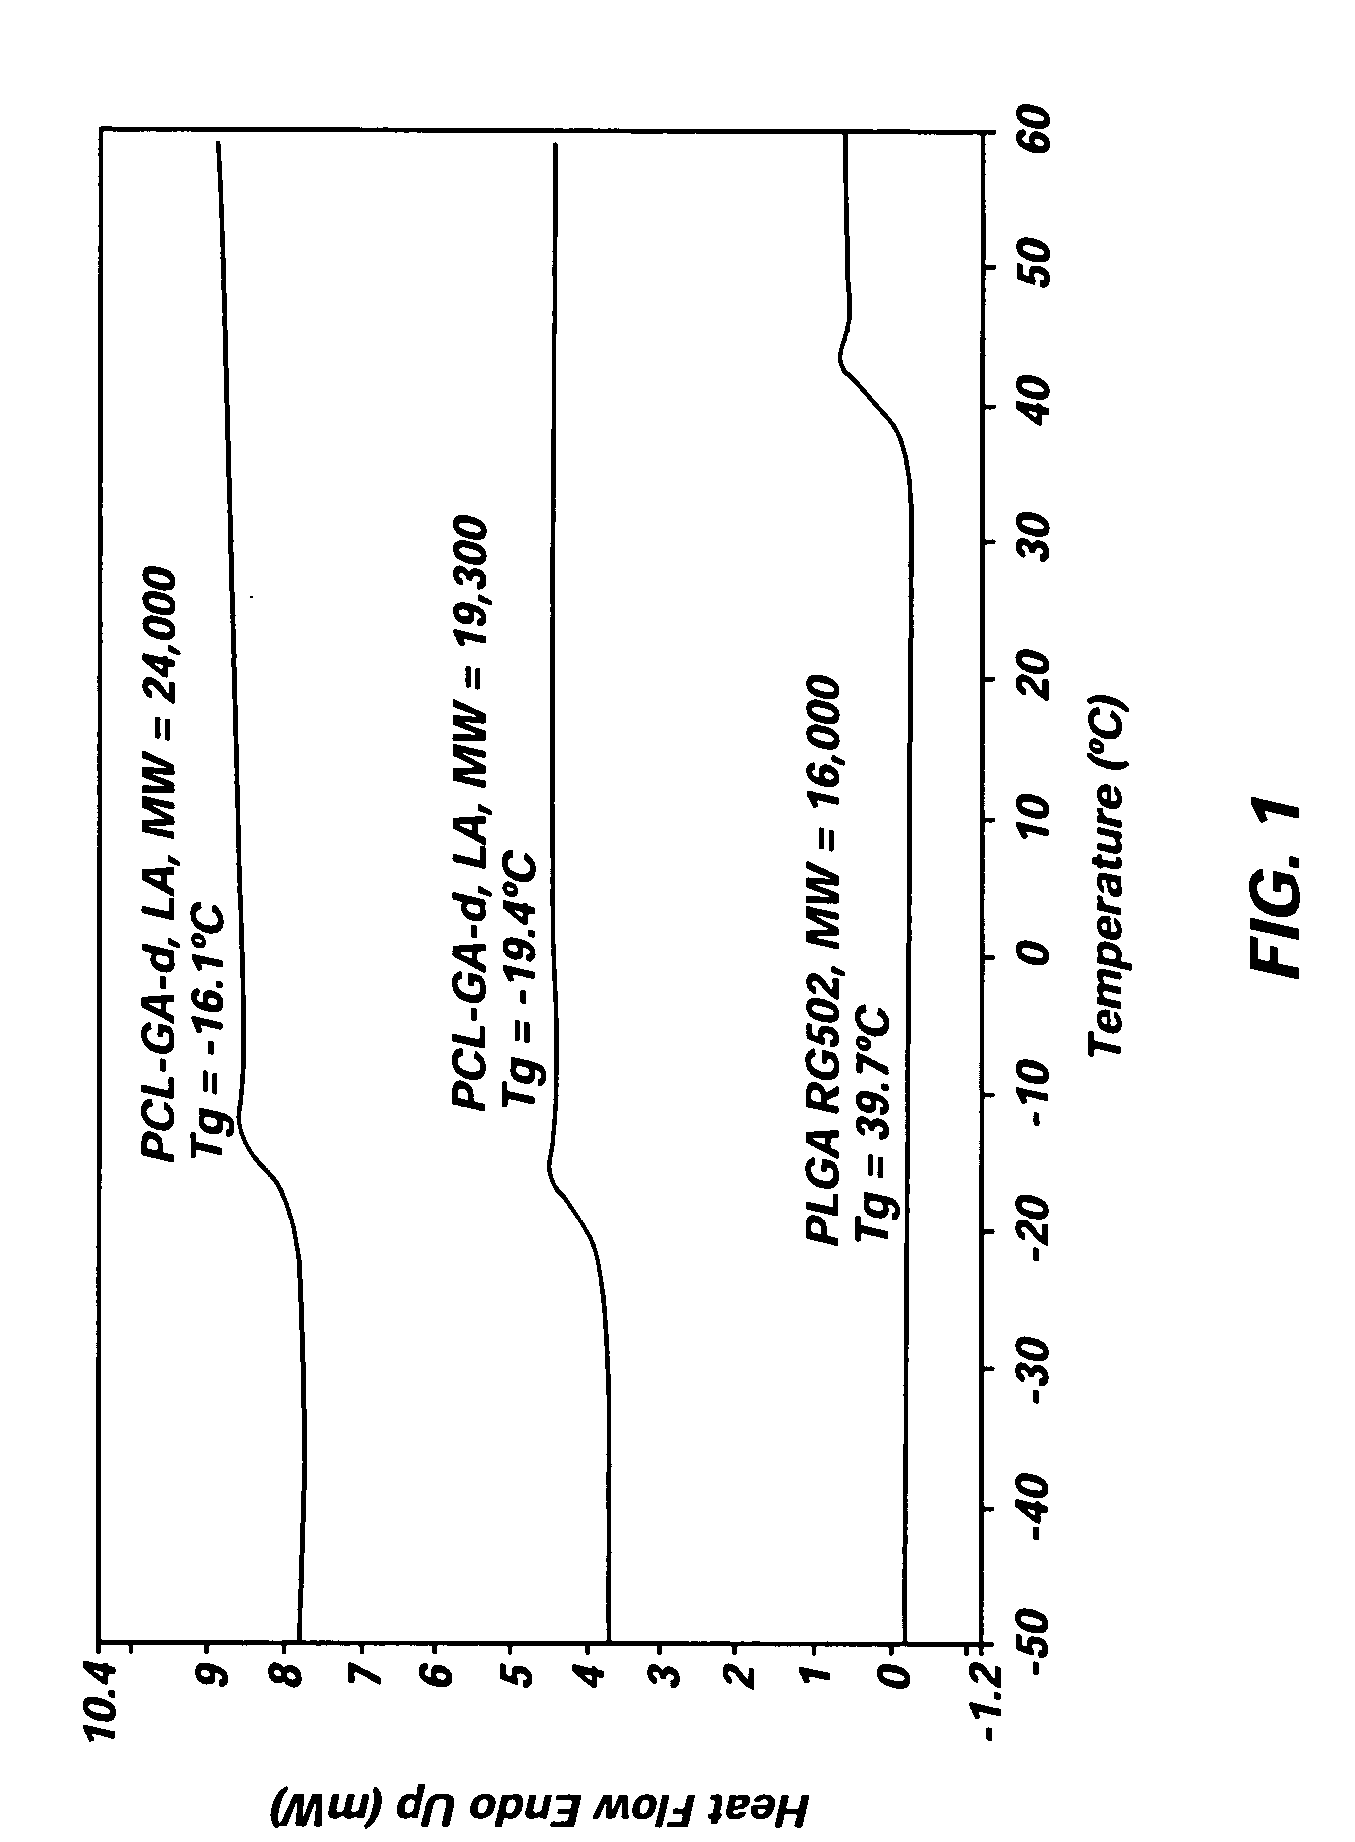 Implantable elastomeric depot compositions and uses thereof